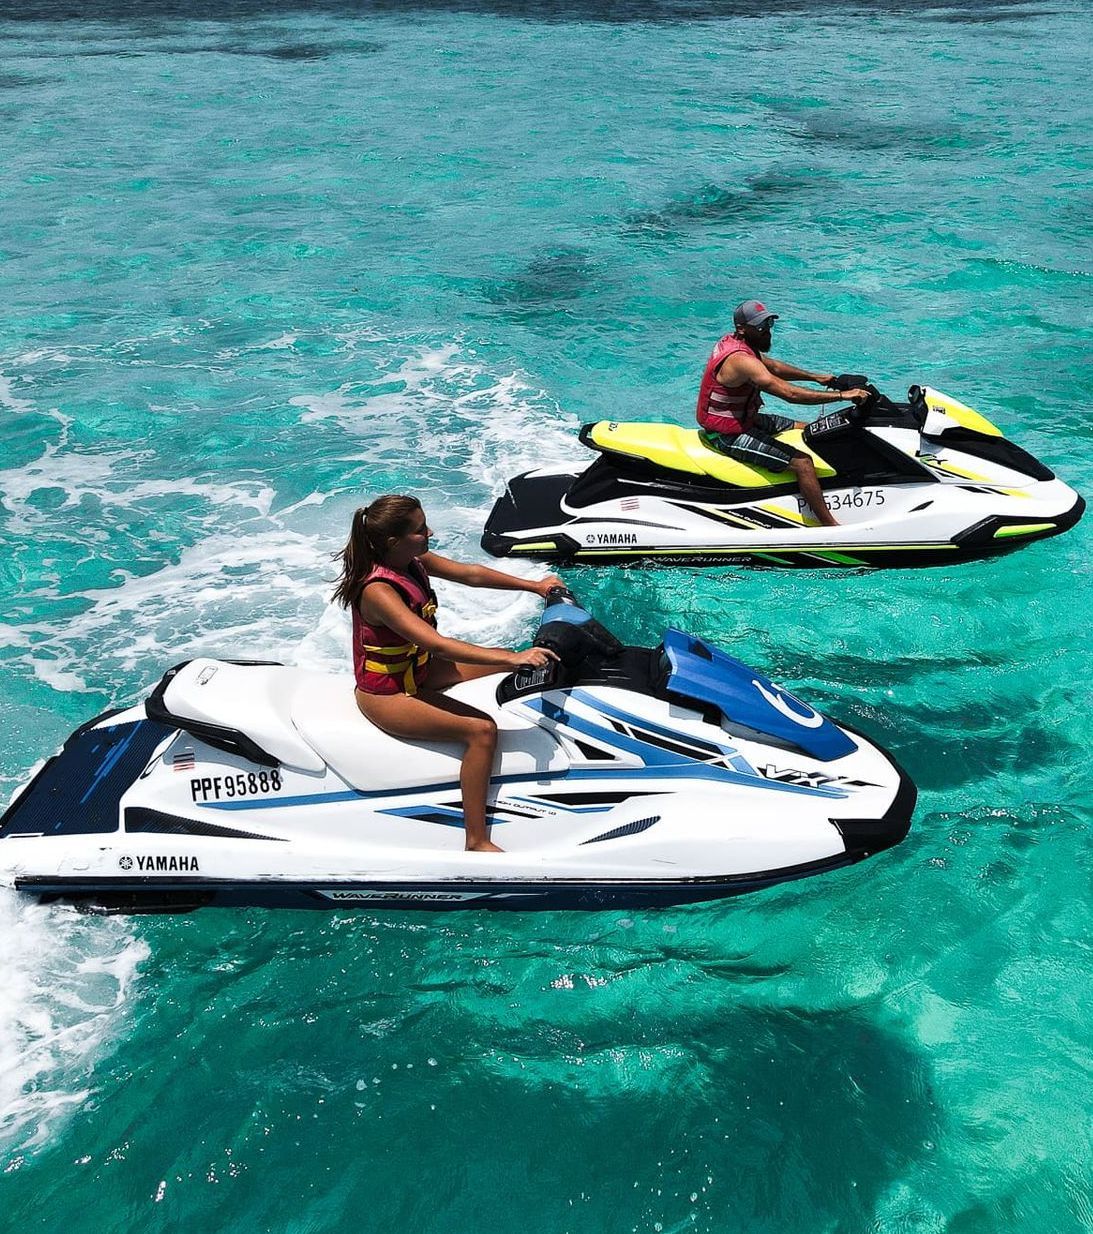 A man and a woman are riding jet skis in the ocean.